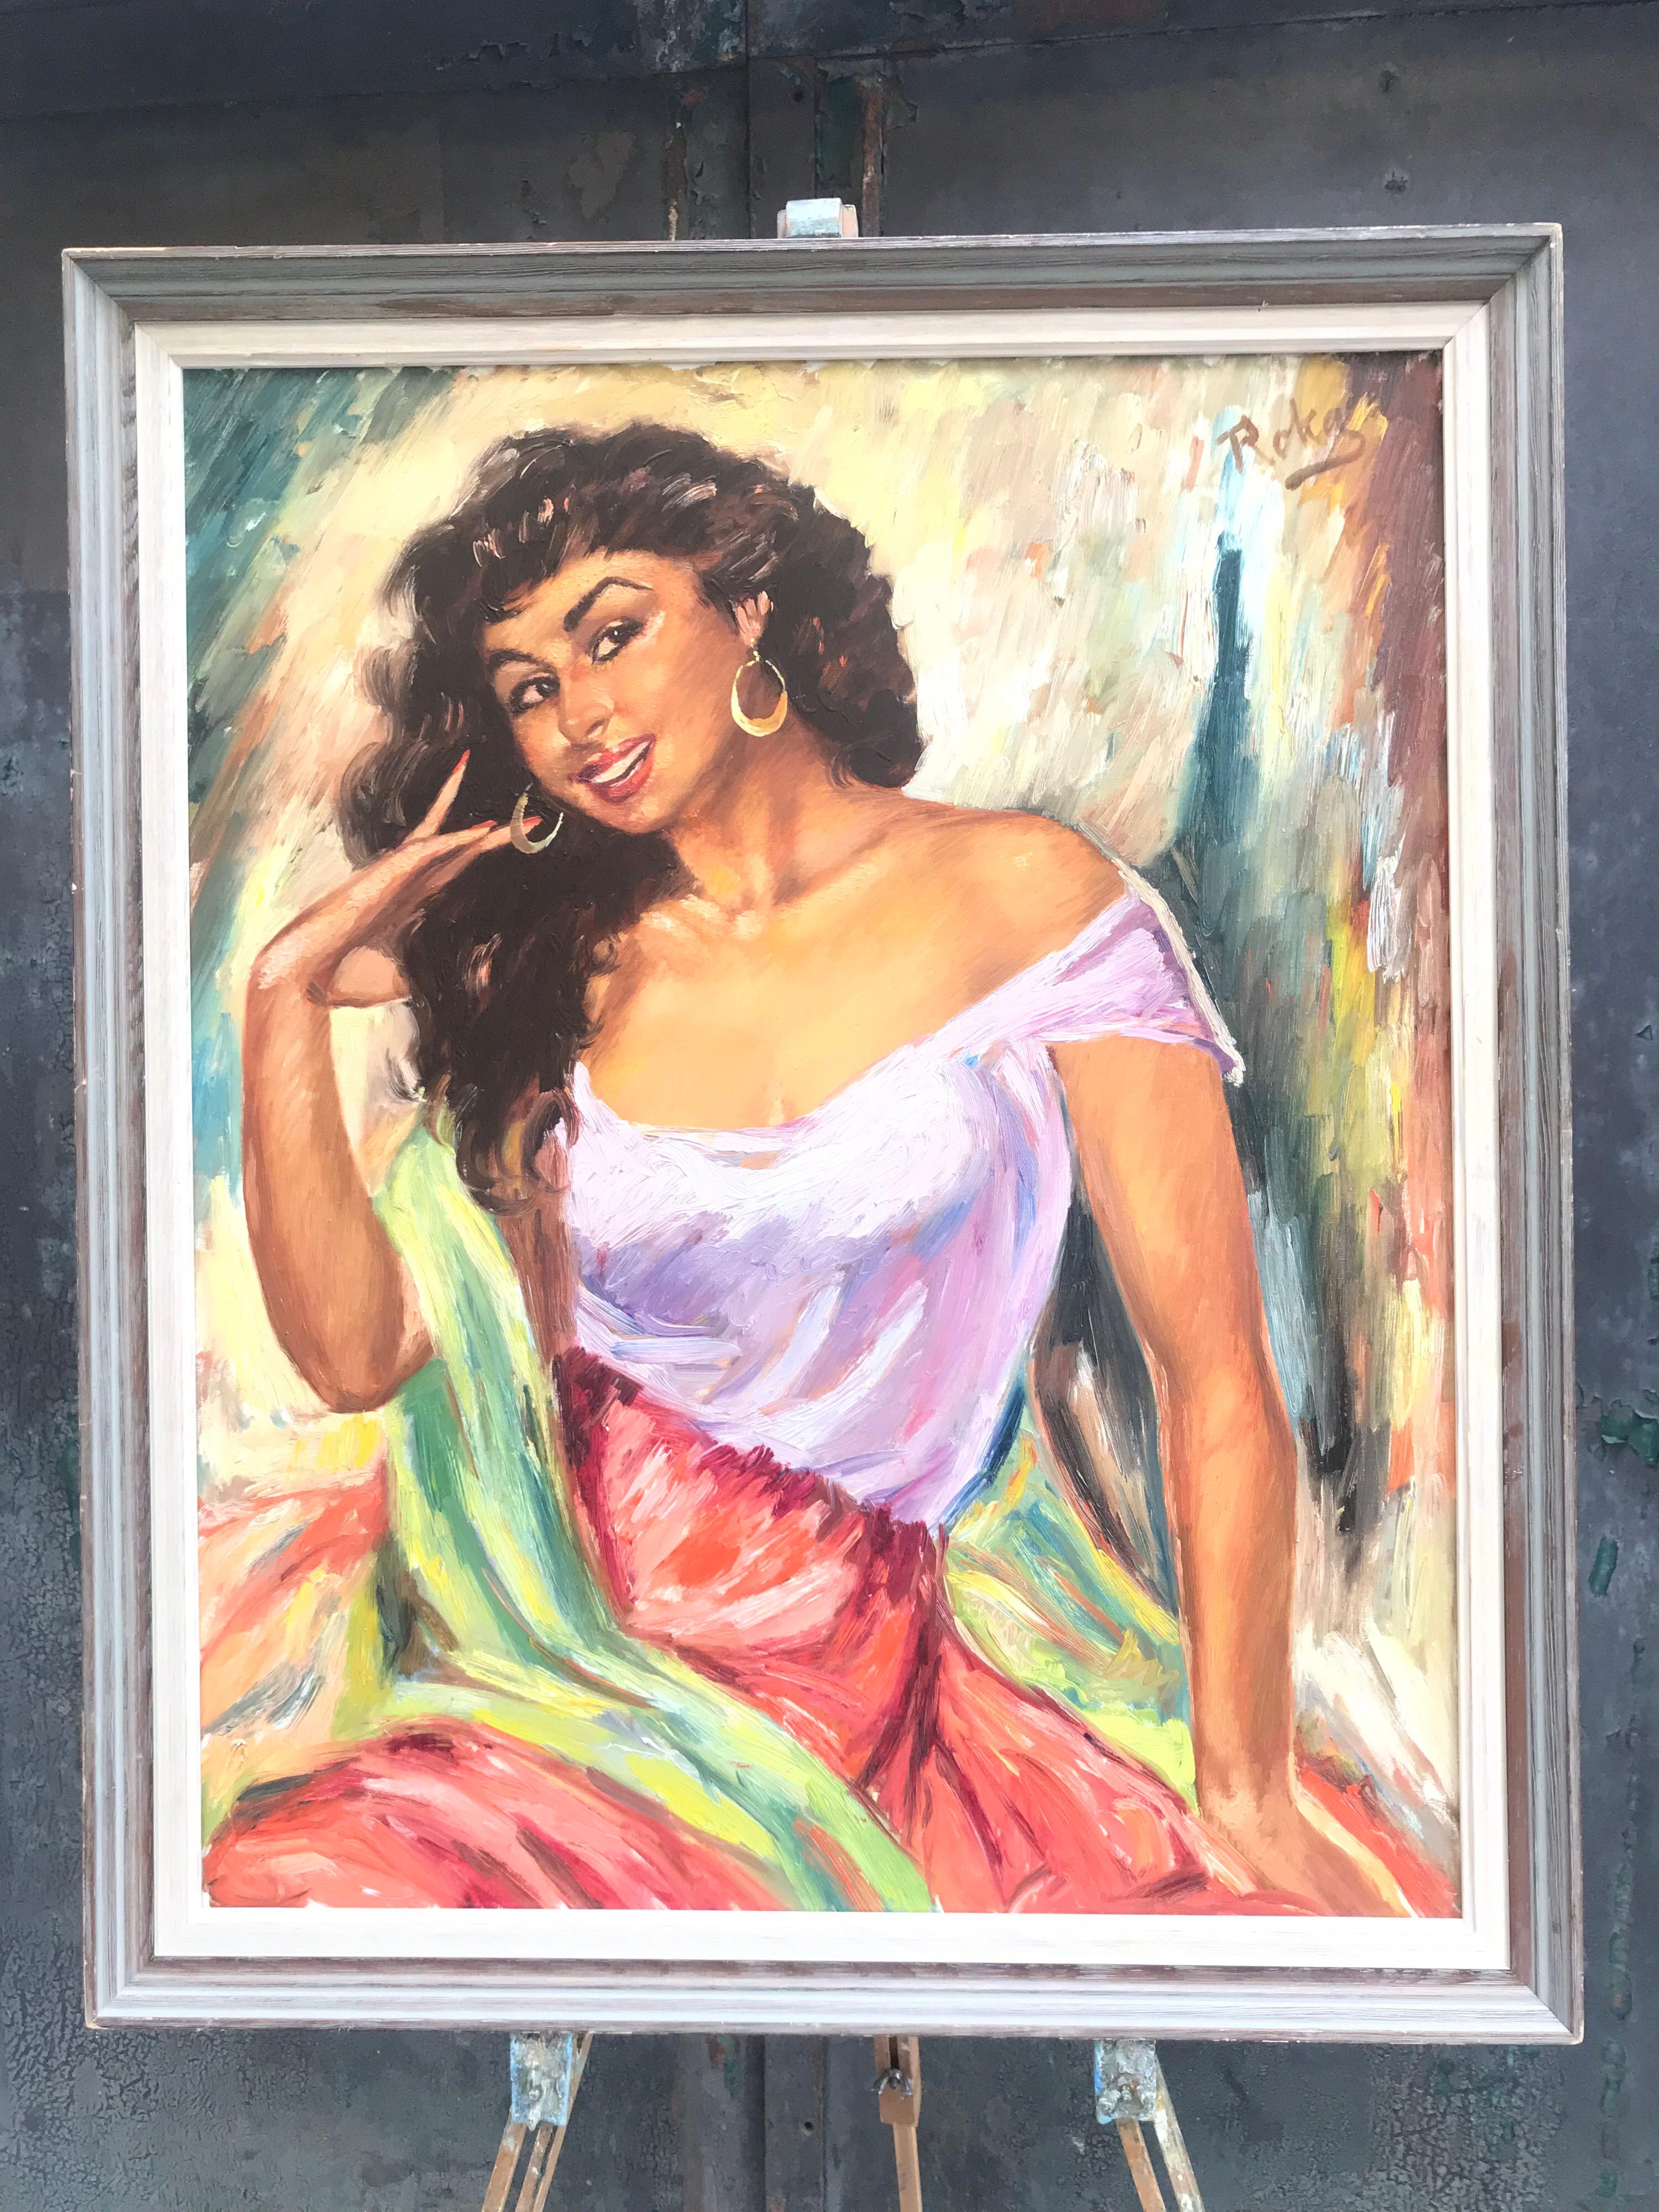 Hand-Painted Realest Oil on Canvas of a Spanish Señorita by Charles Roka from the 1960s